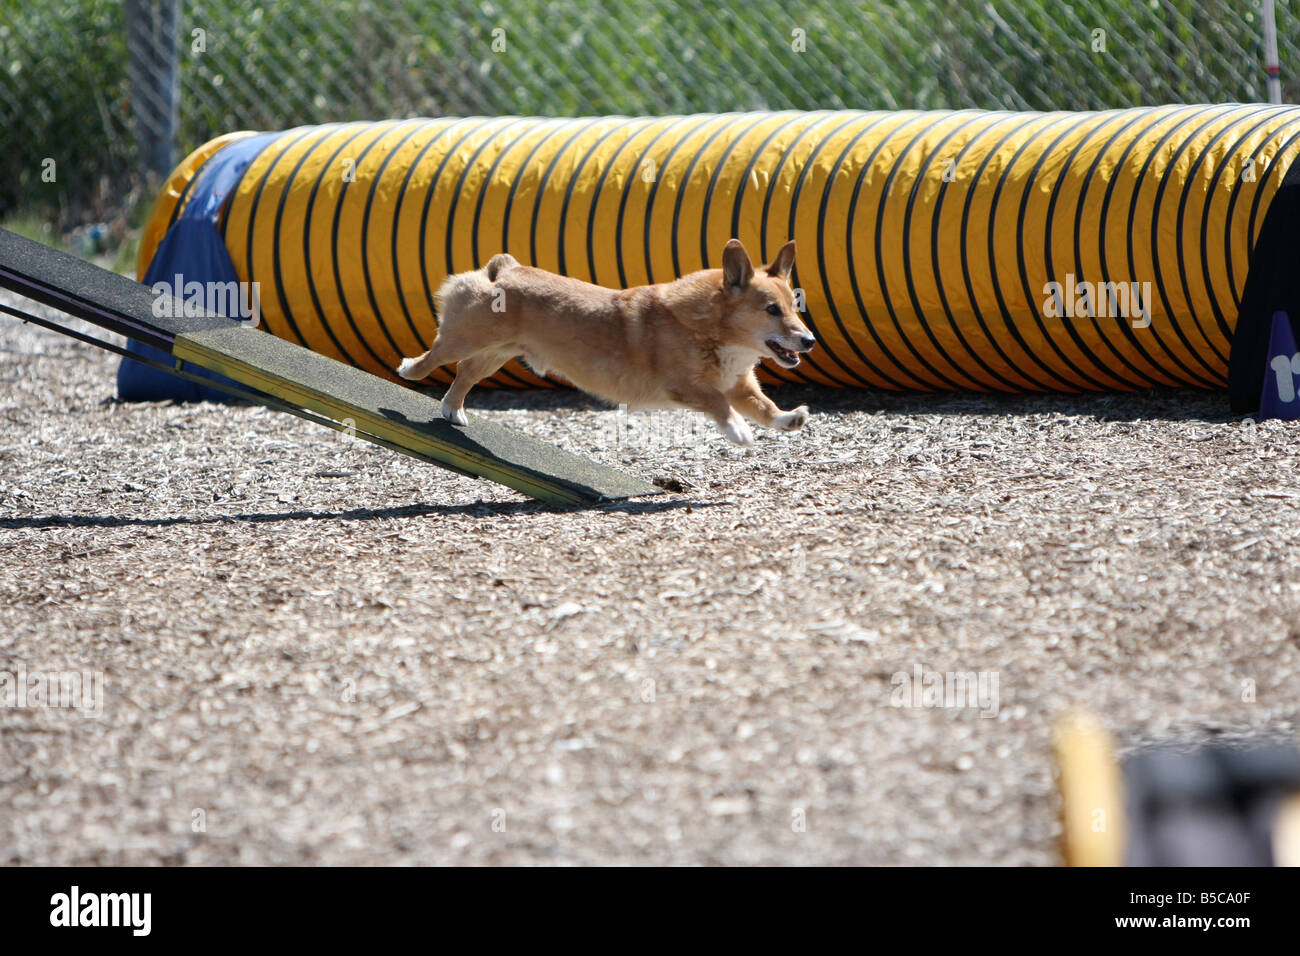 Welsh Corgi running down the bottom of an a frame at a dog agility trial. Stock Photo